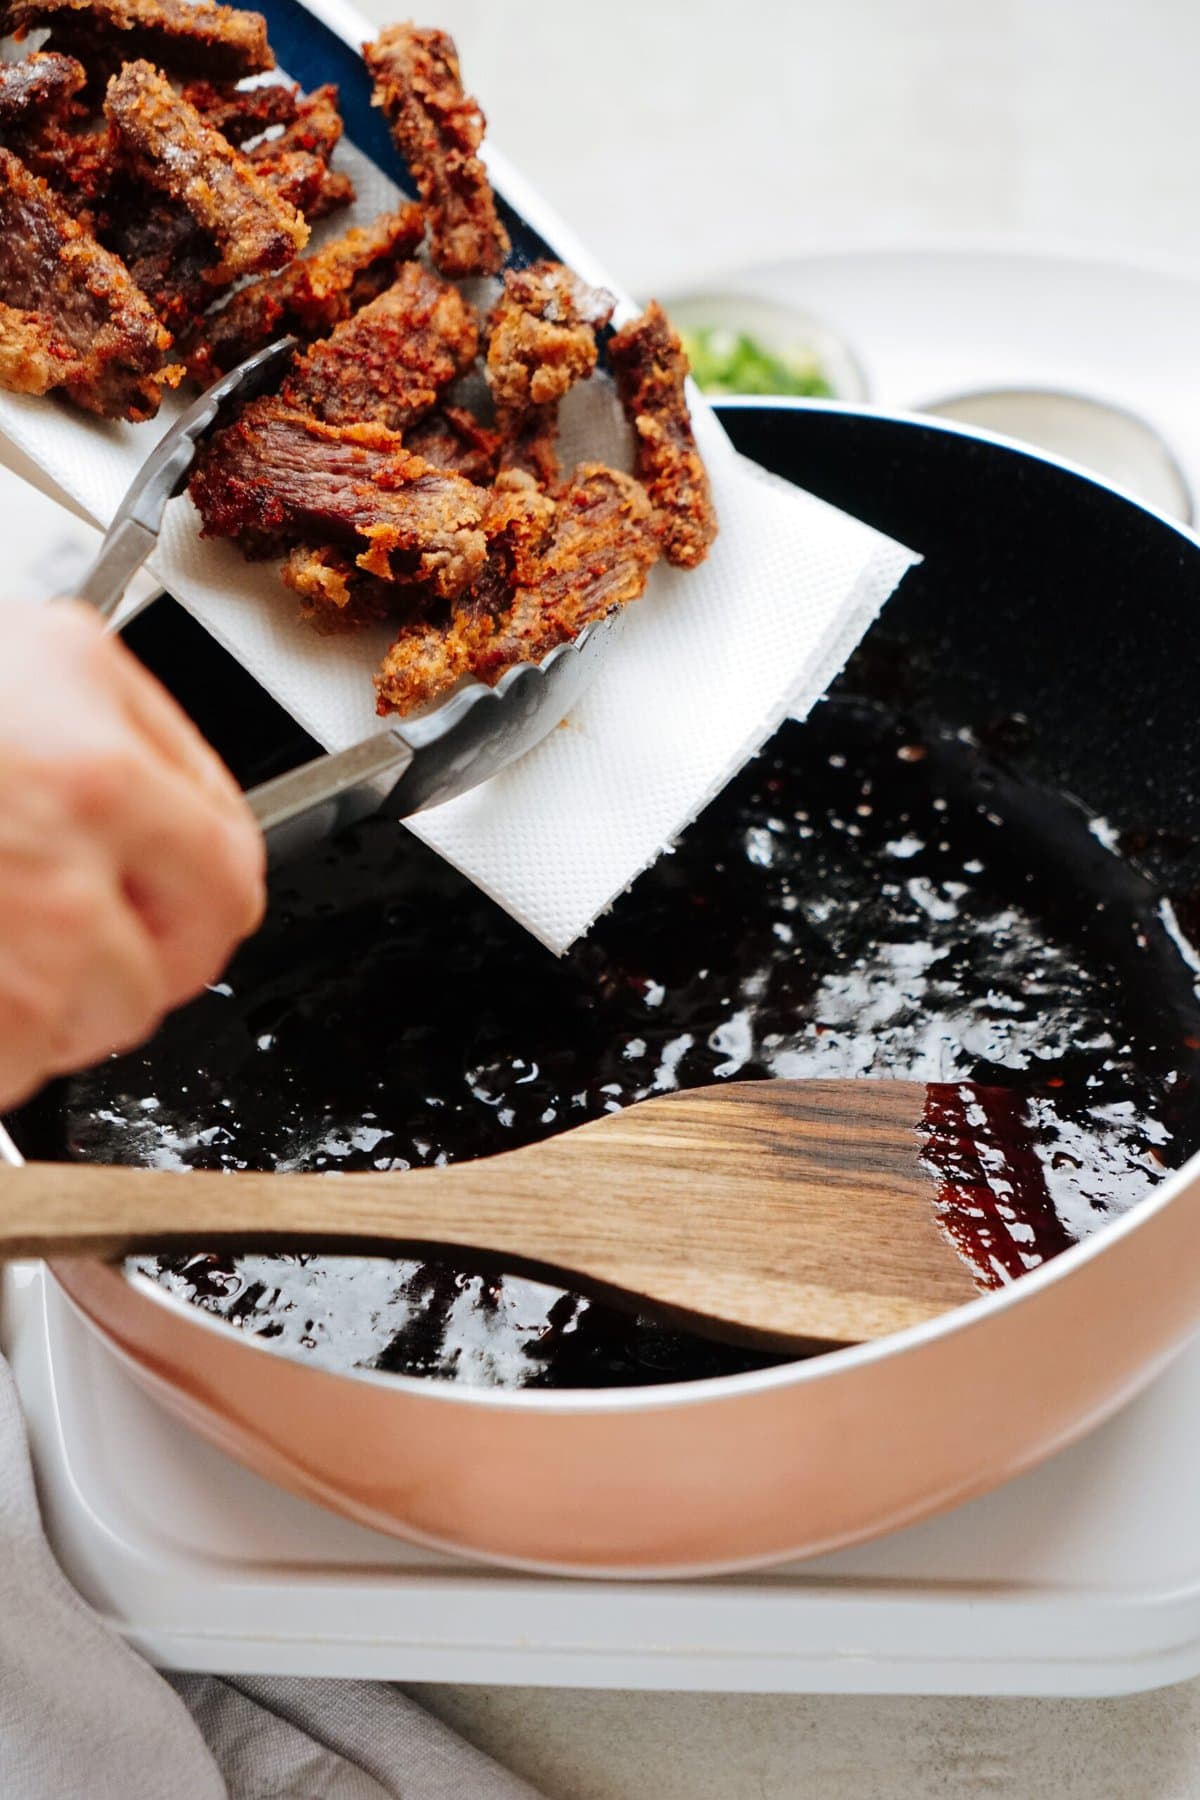 A person uses tongs to place fried beef onto a paper towel from a pan filled with oil. A wooden spatula rests in the pan.